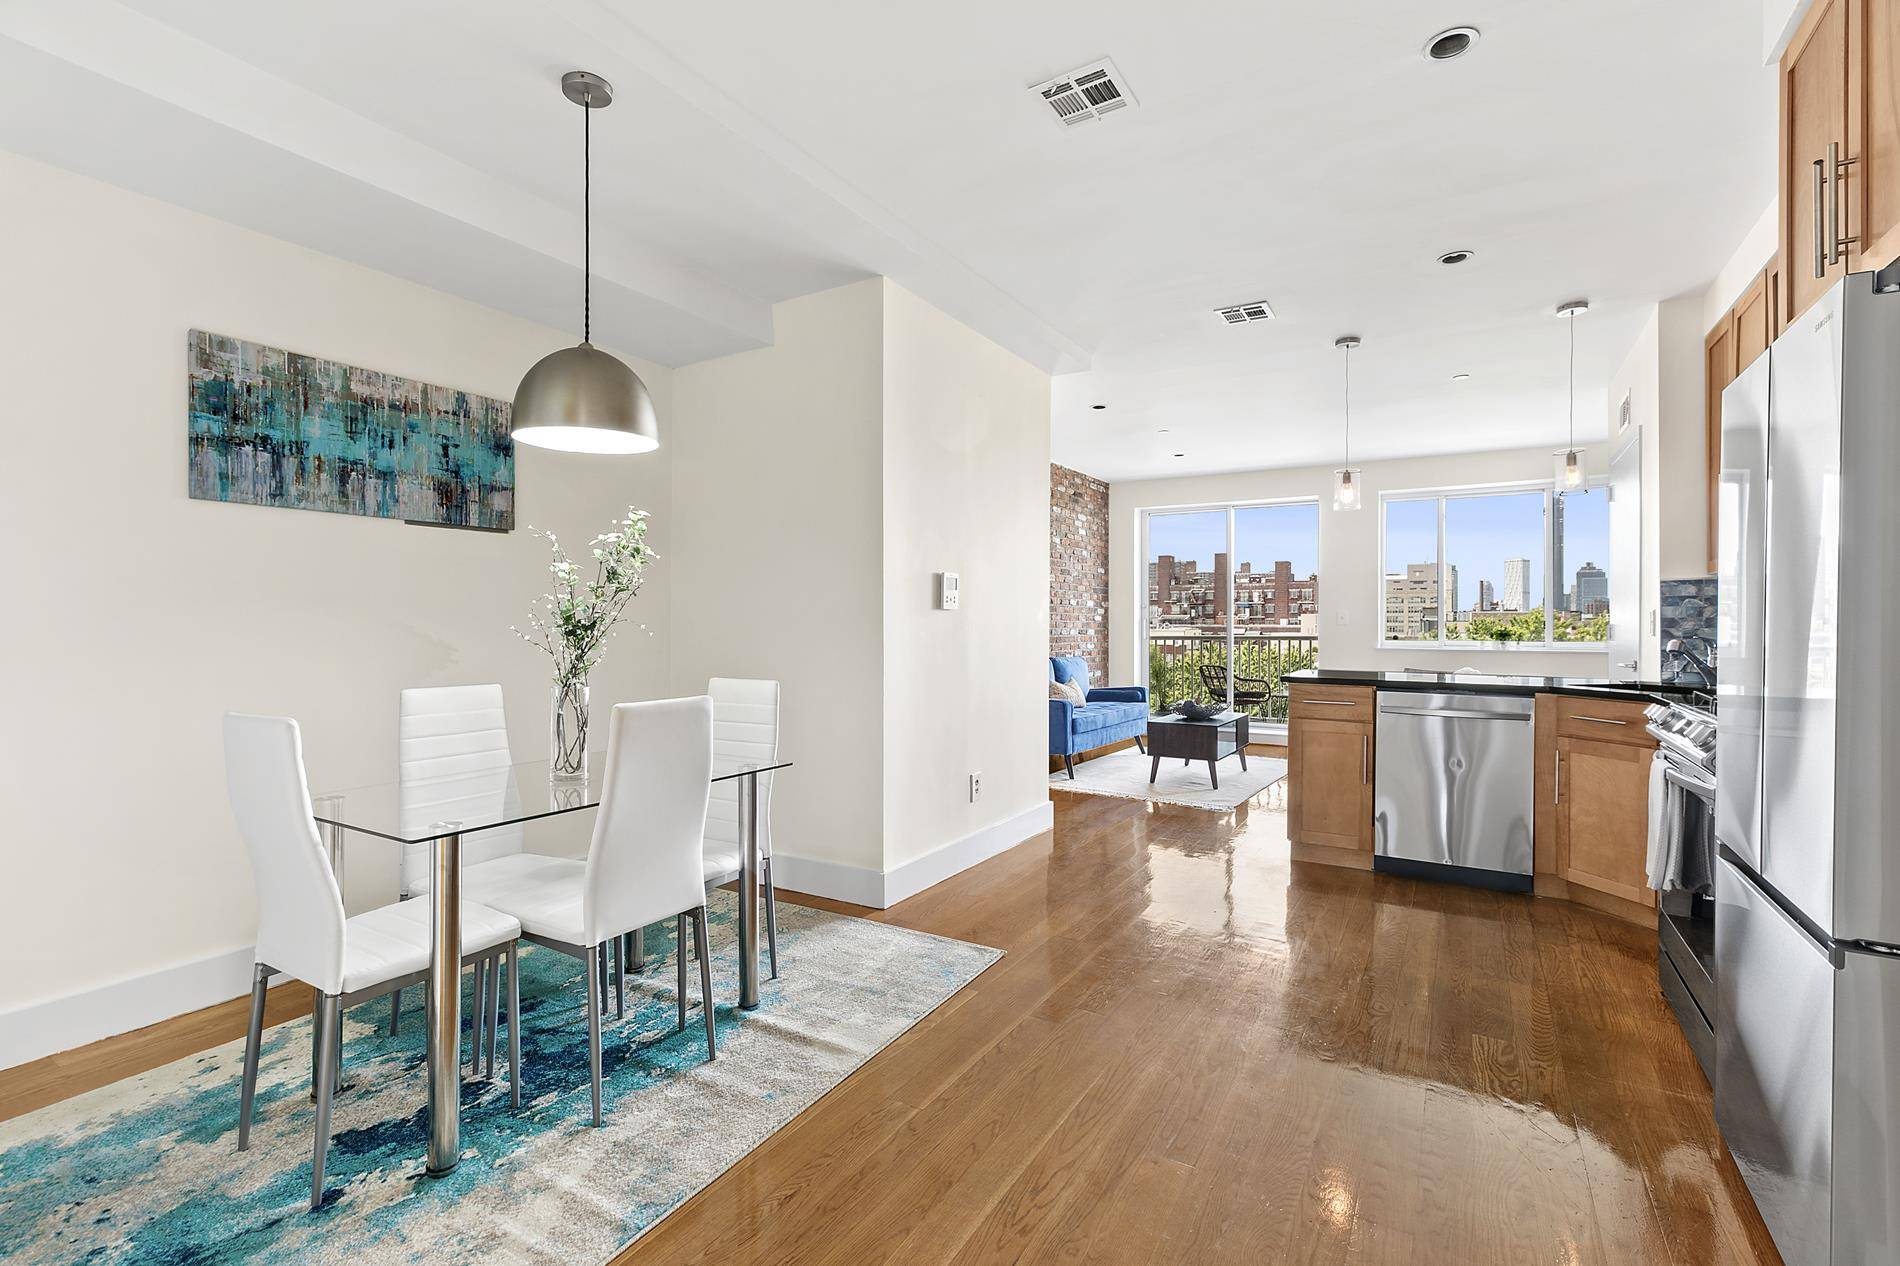 Charming Modern ElegantWelcome to 197 Spencer St Apt 8B, your very own boutique condominium in Bedford Stuyvesant, border lining Clinton Hill.